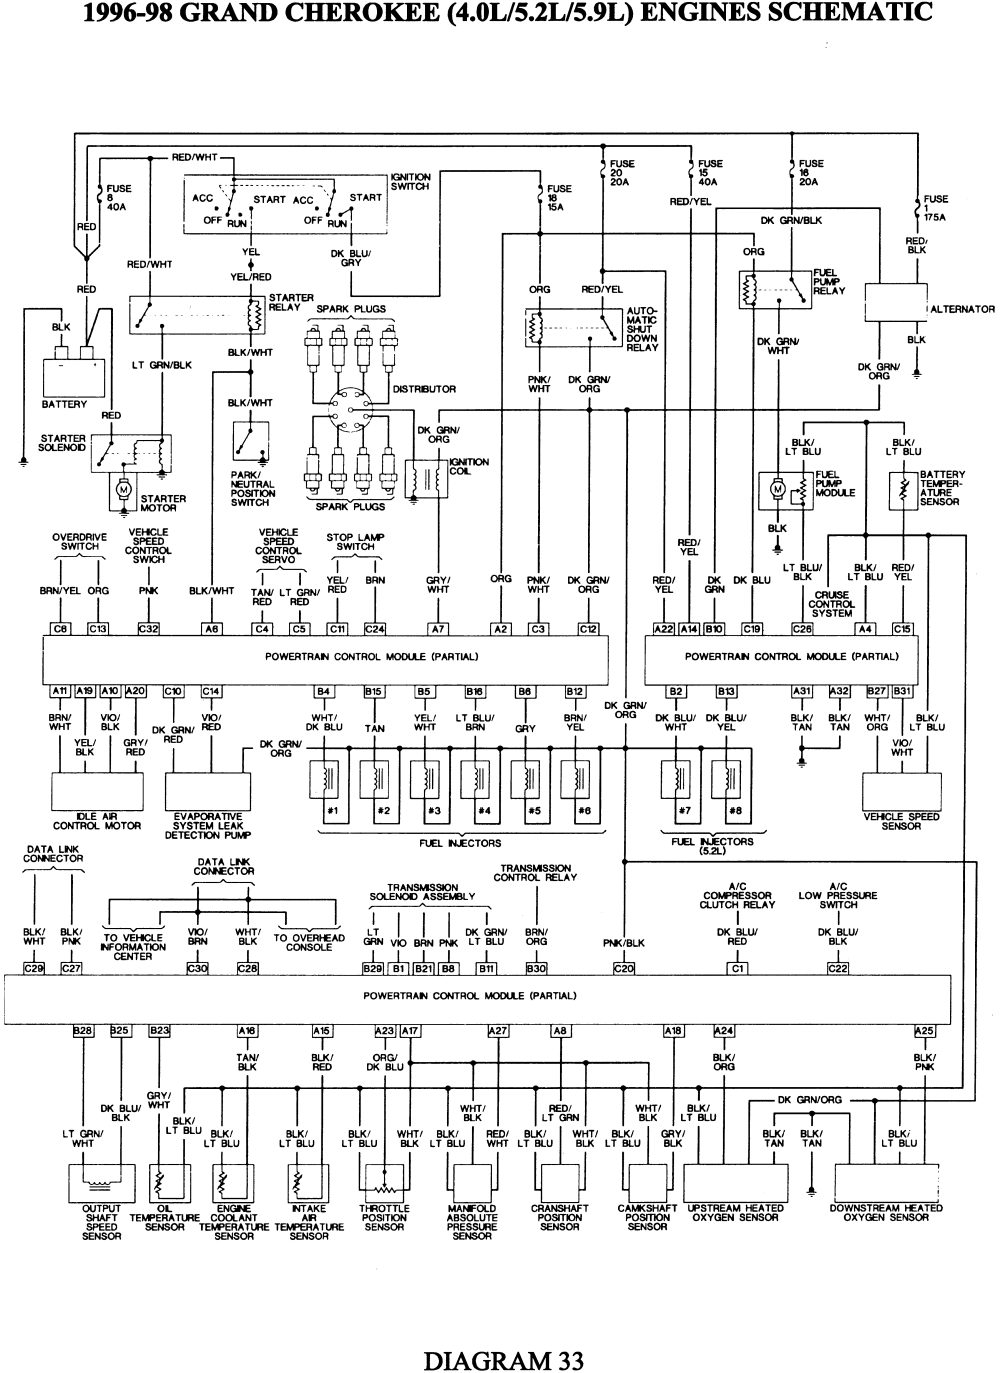 2008 Jeep Grand Cherokee Stereo Wiring Diagram from 1.bp.blogspot.com